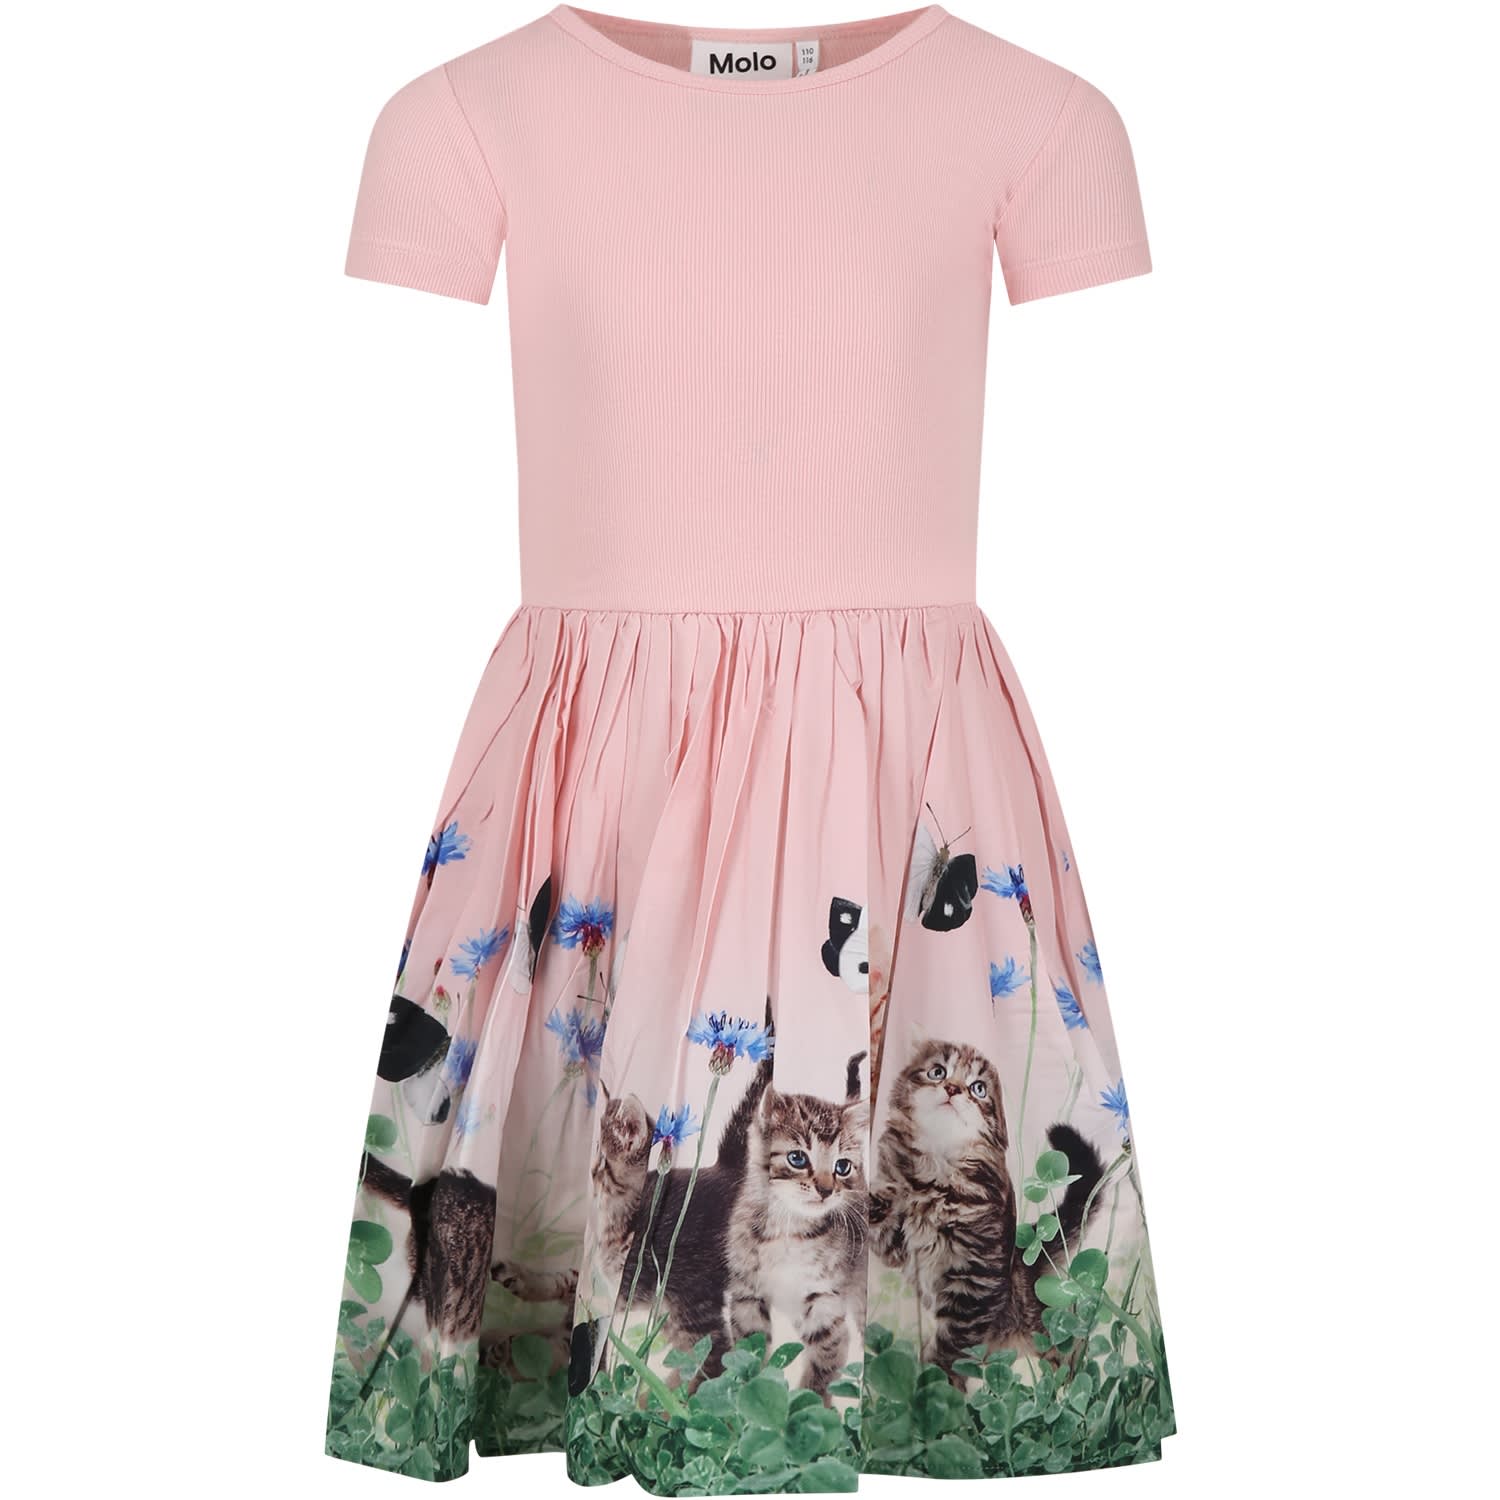 Molo Kids' Pink Dress For Girl With Cat Print